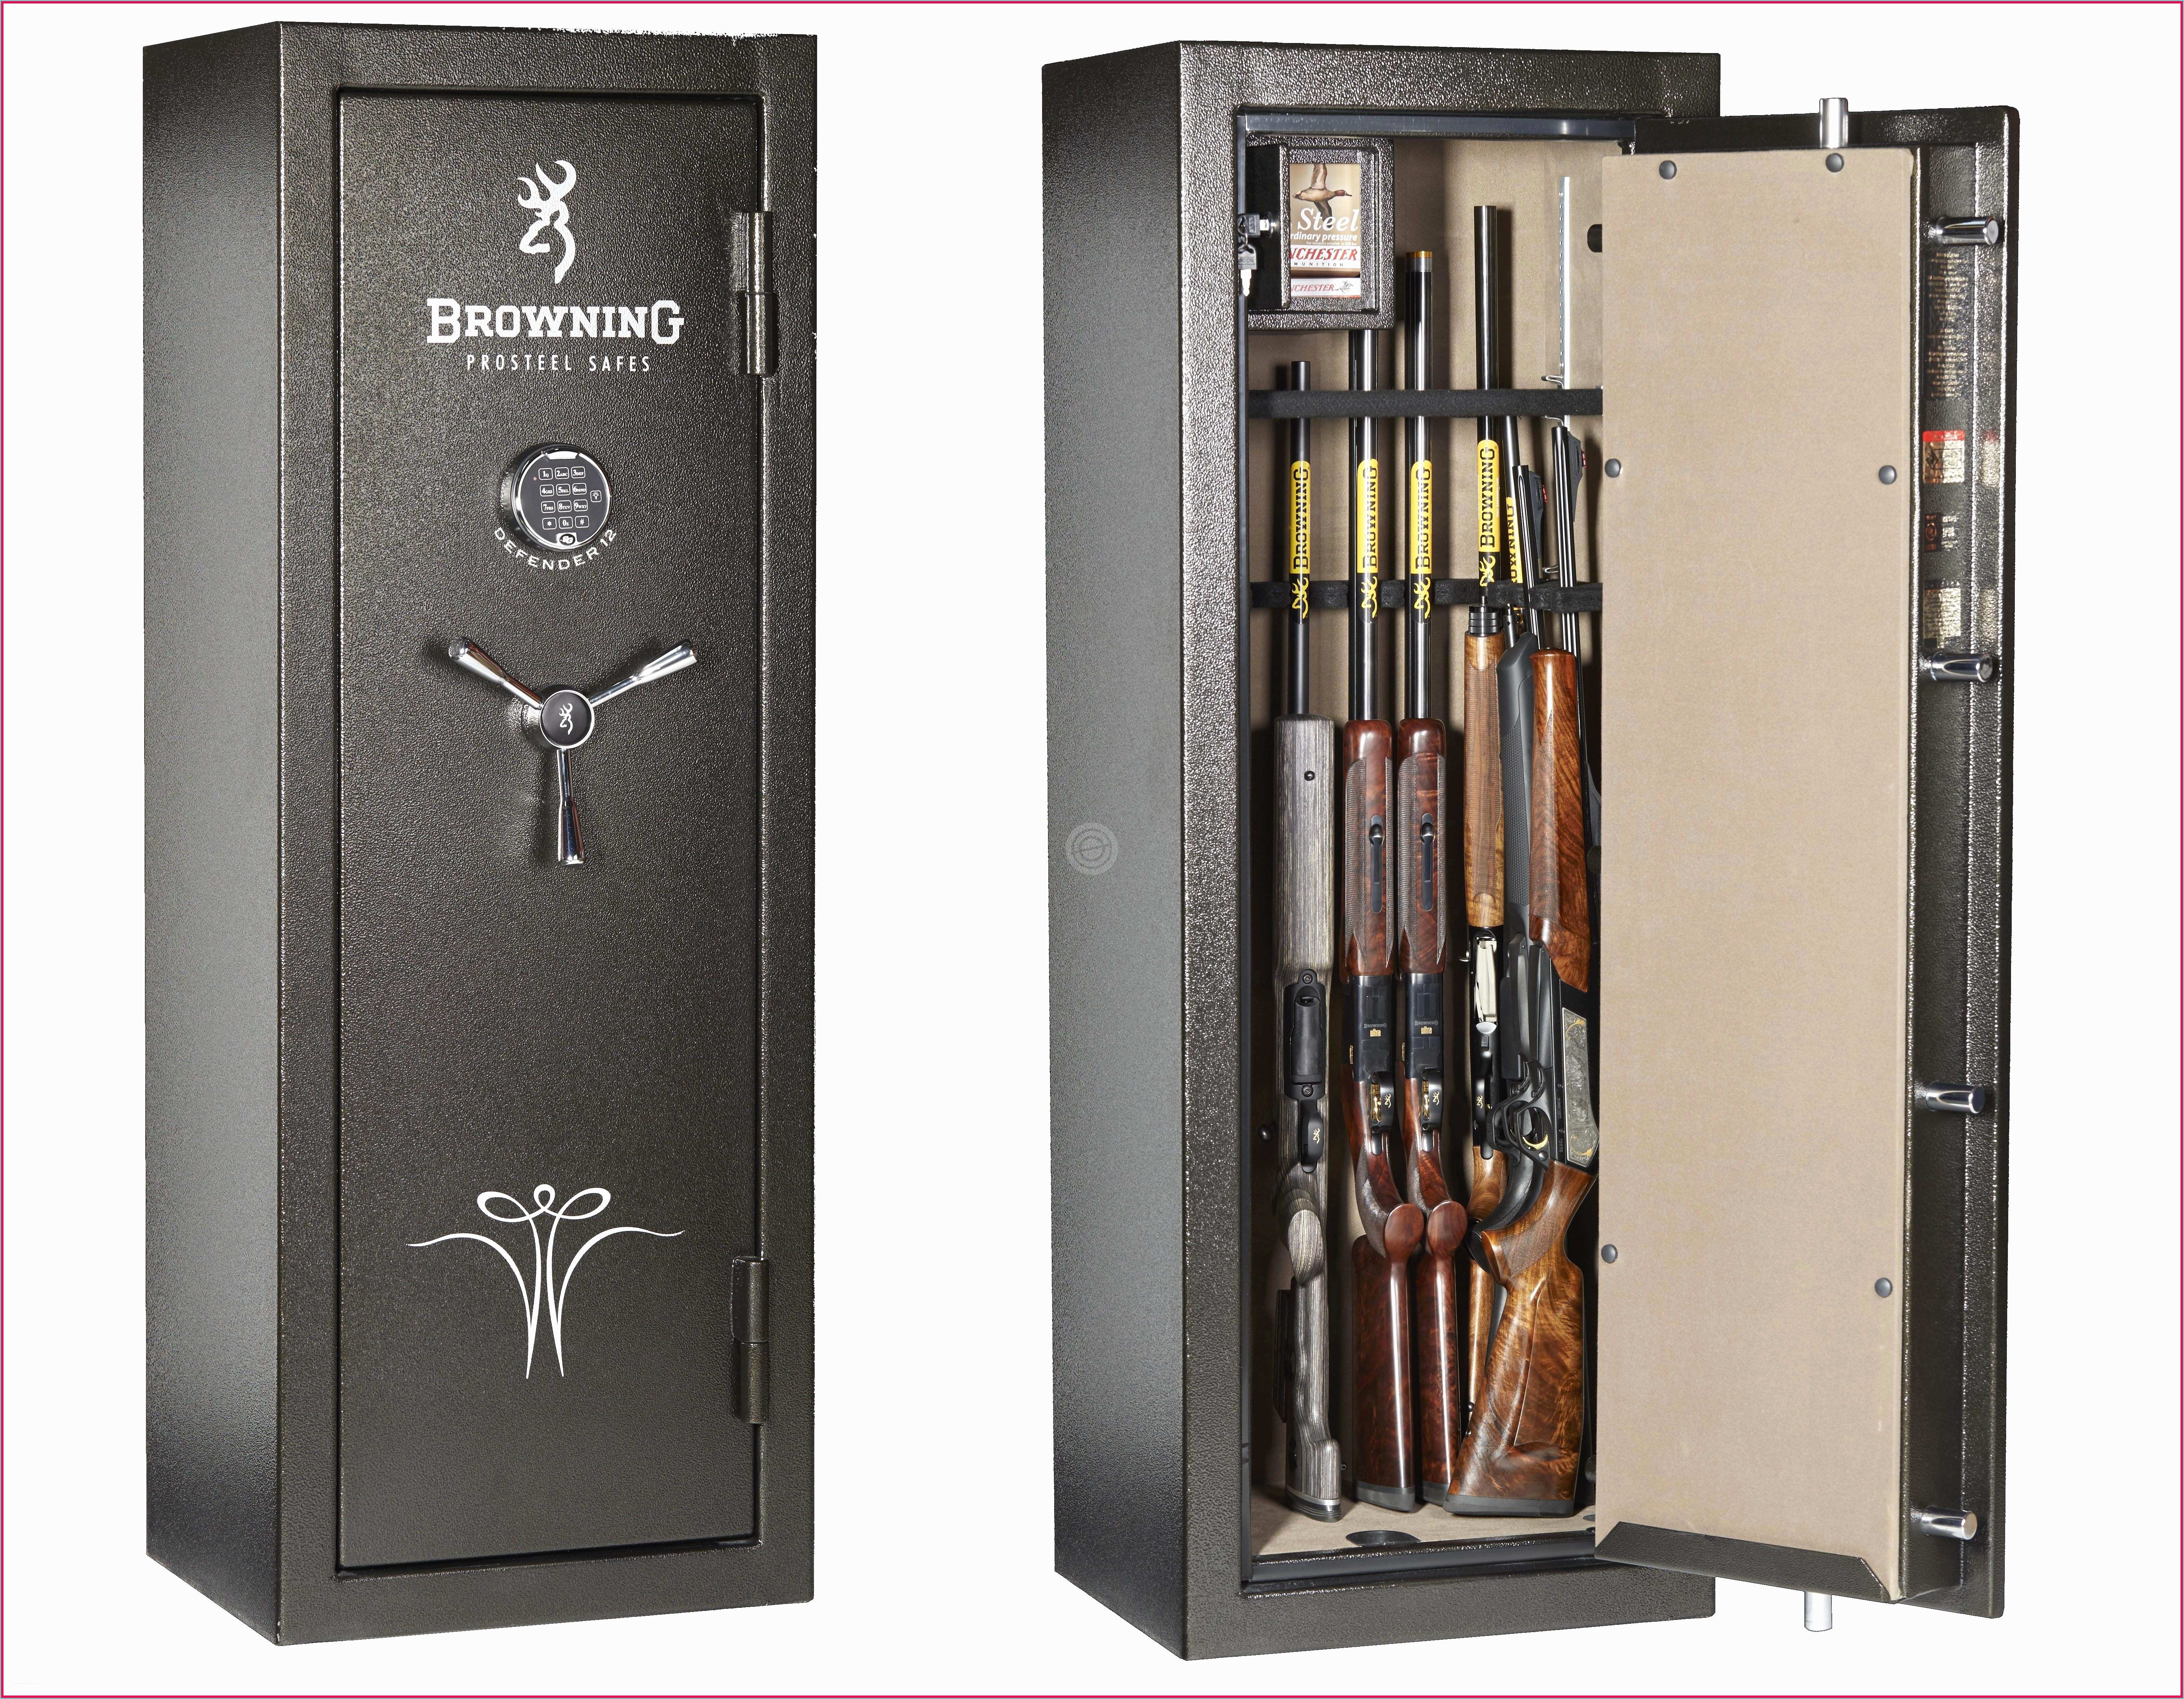 Coffre fort Arme Occasion Armoire Coffre fort Elegant Armoire Fusils Ultimate Safe